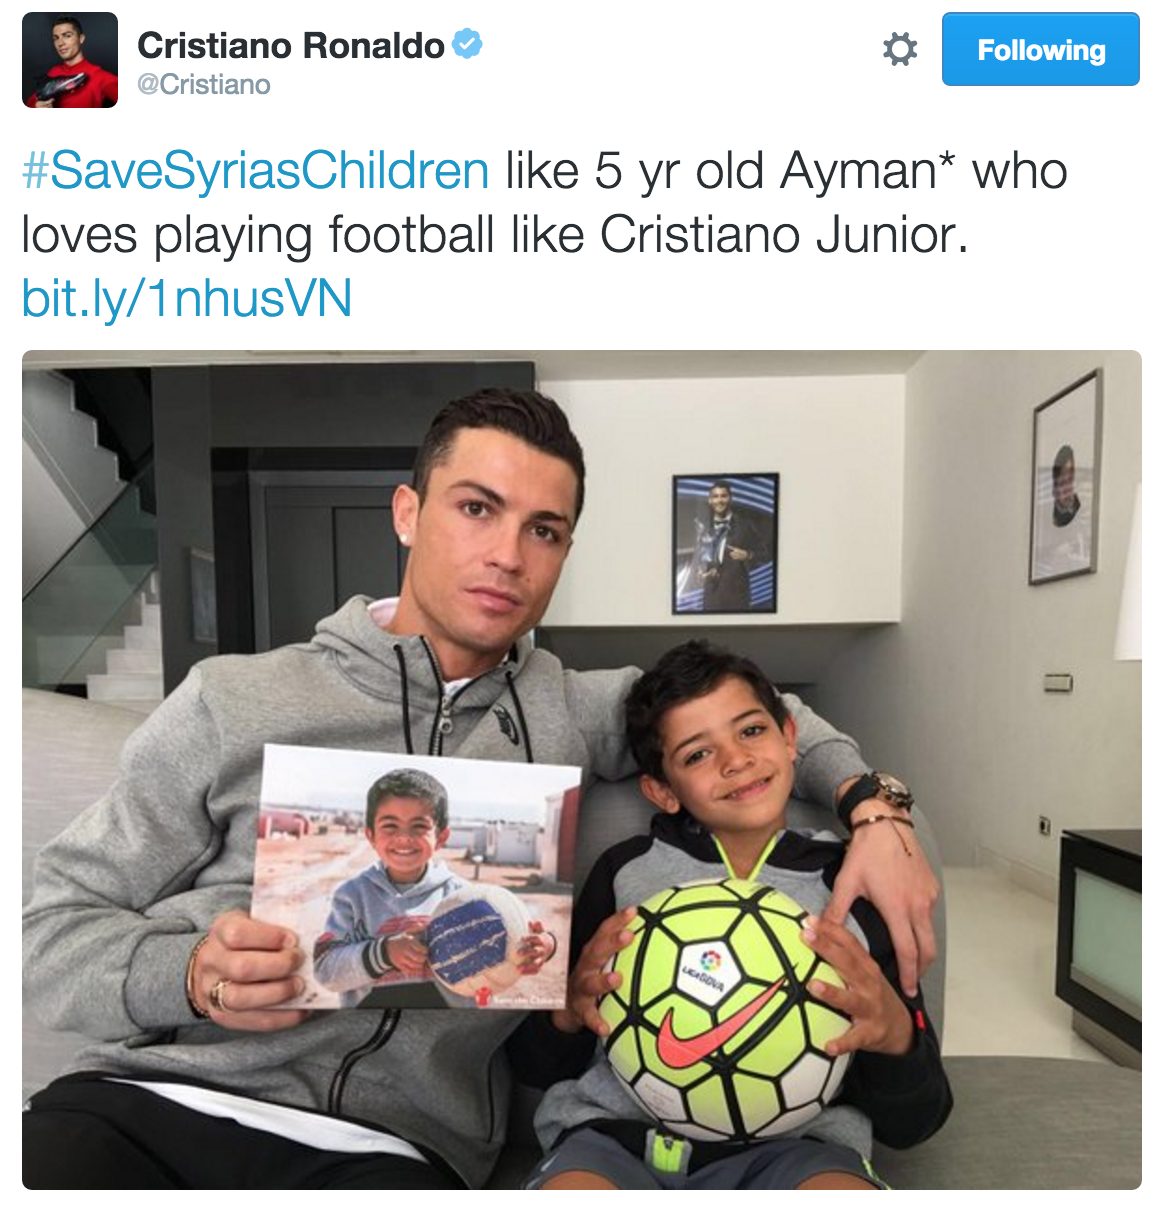 Cristiano Ronaldo heard about and publicized the story of Ayman, a five-year-old Syrian refugee.